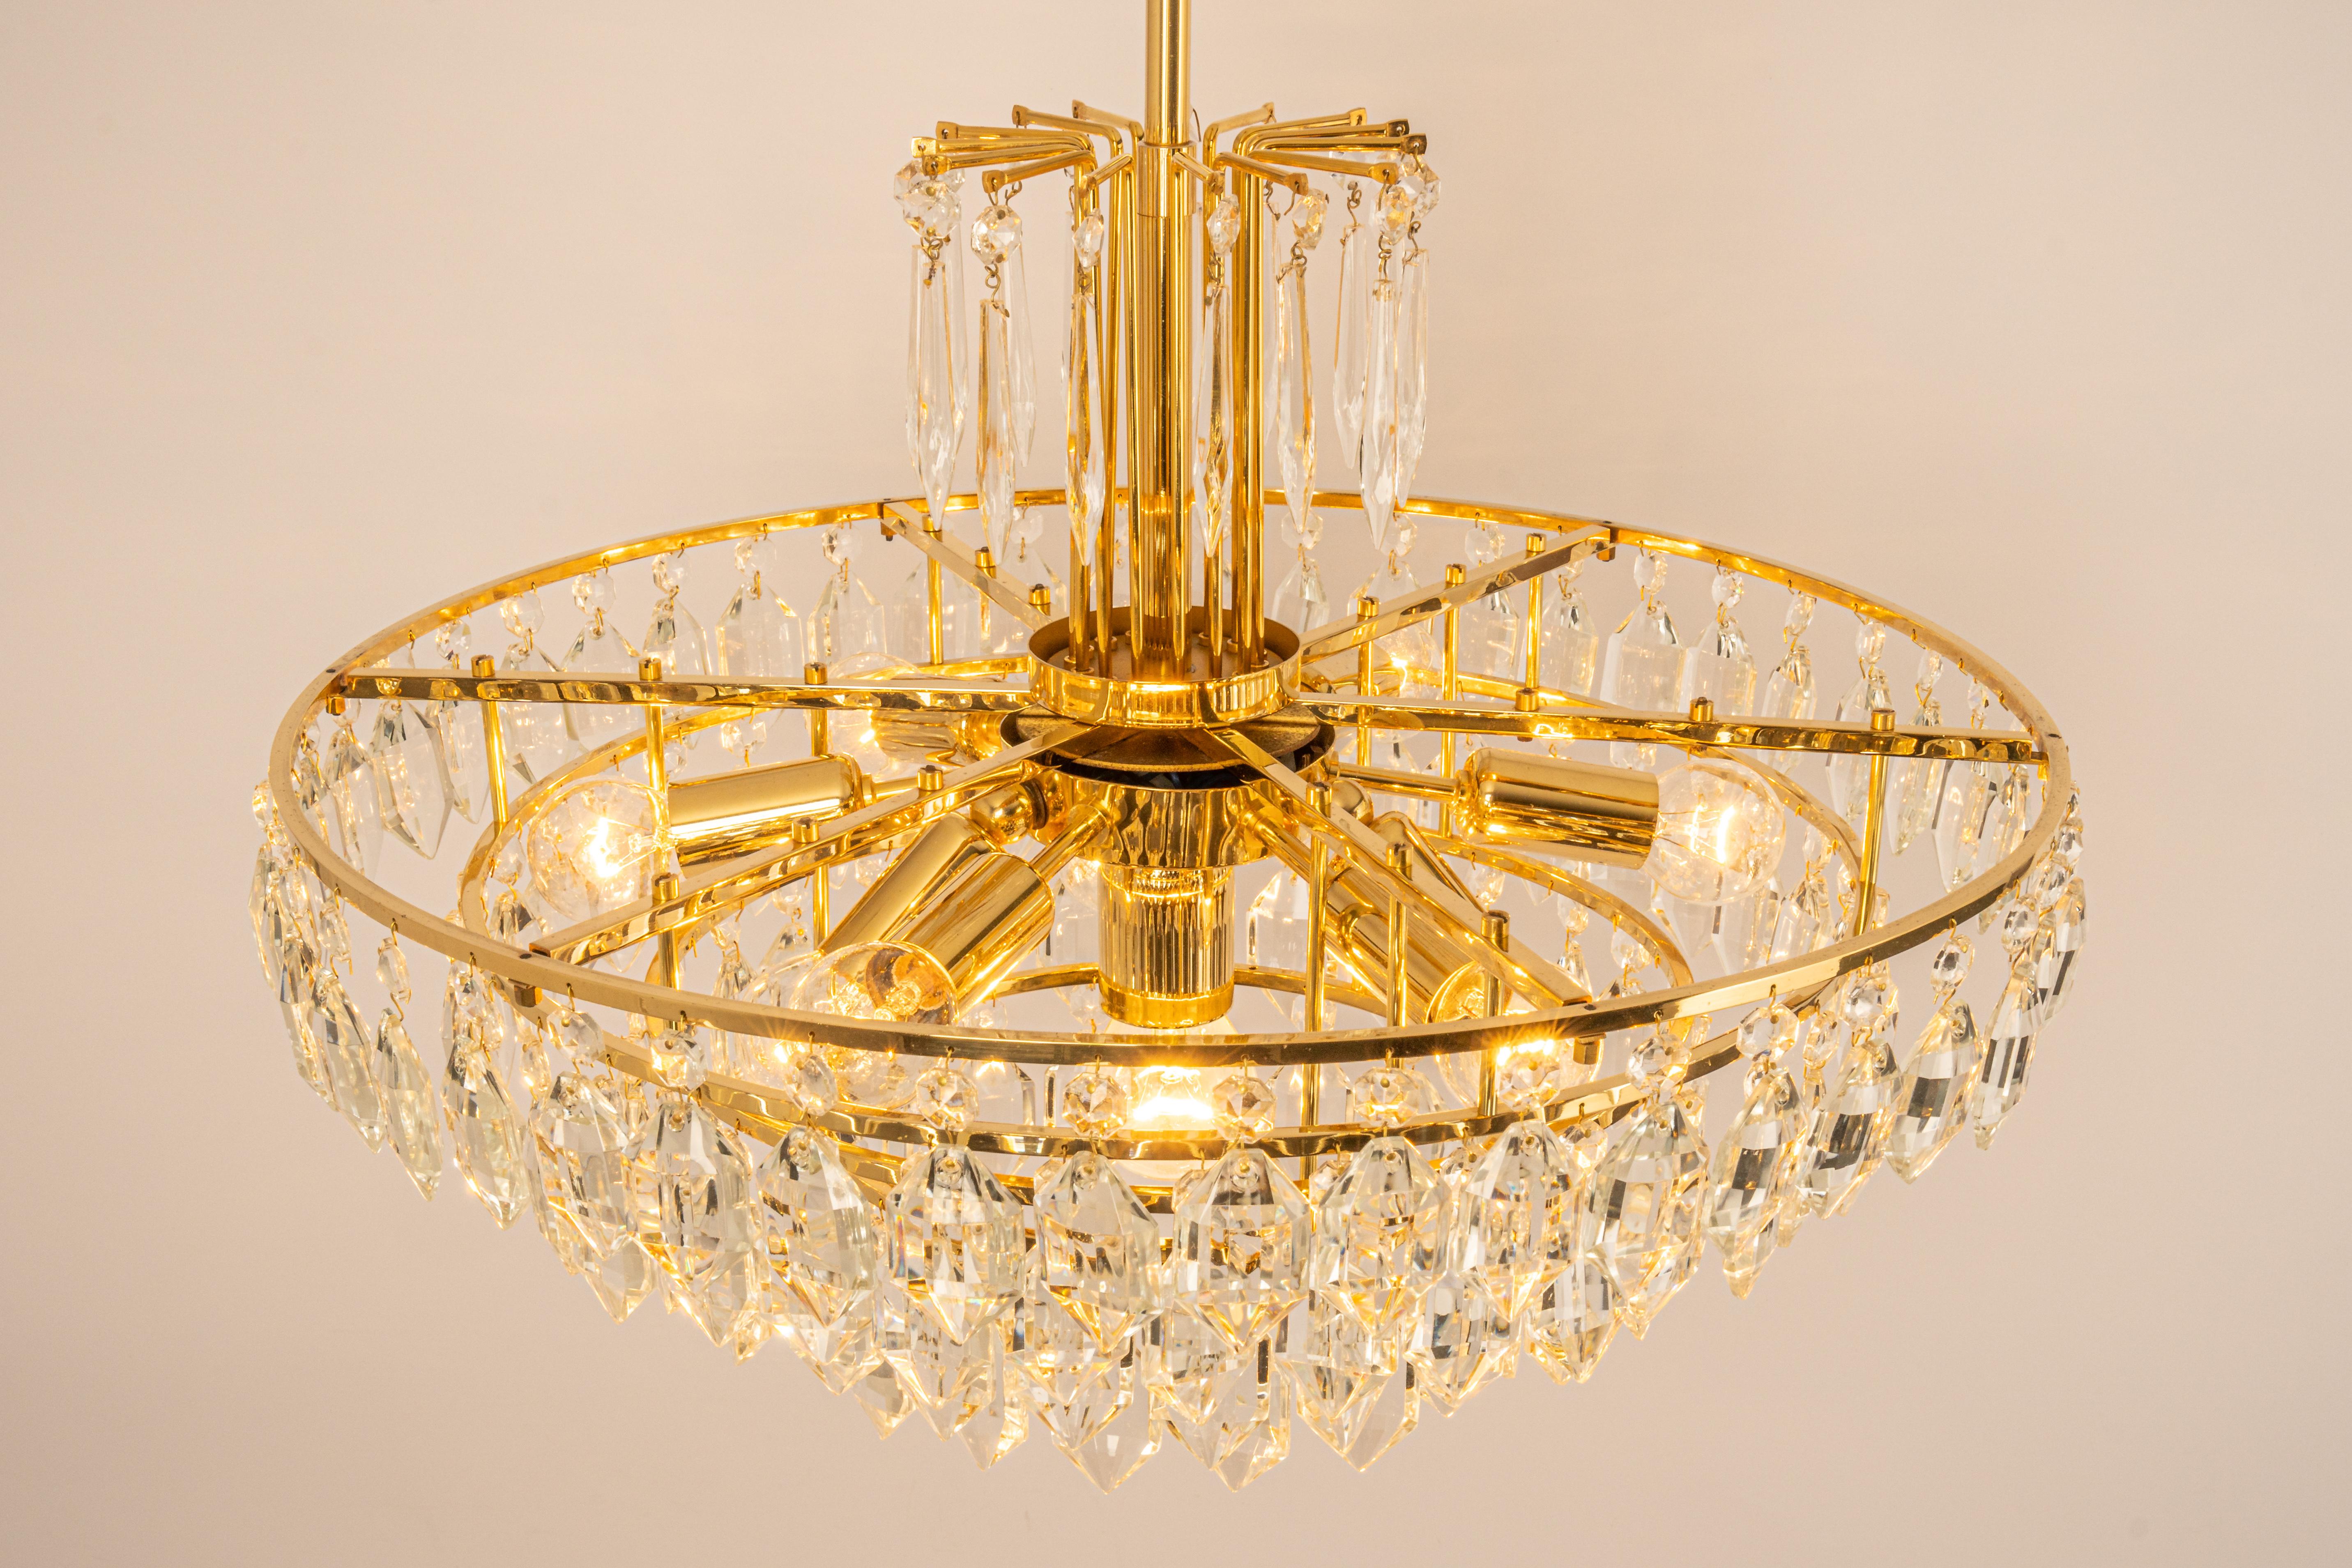 1 of 2 Bakalowits Chandelier, Brass and Crystal Glass, Austria, 1960s For Sale 4